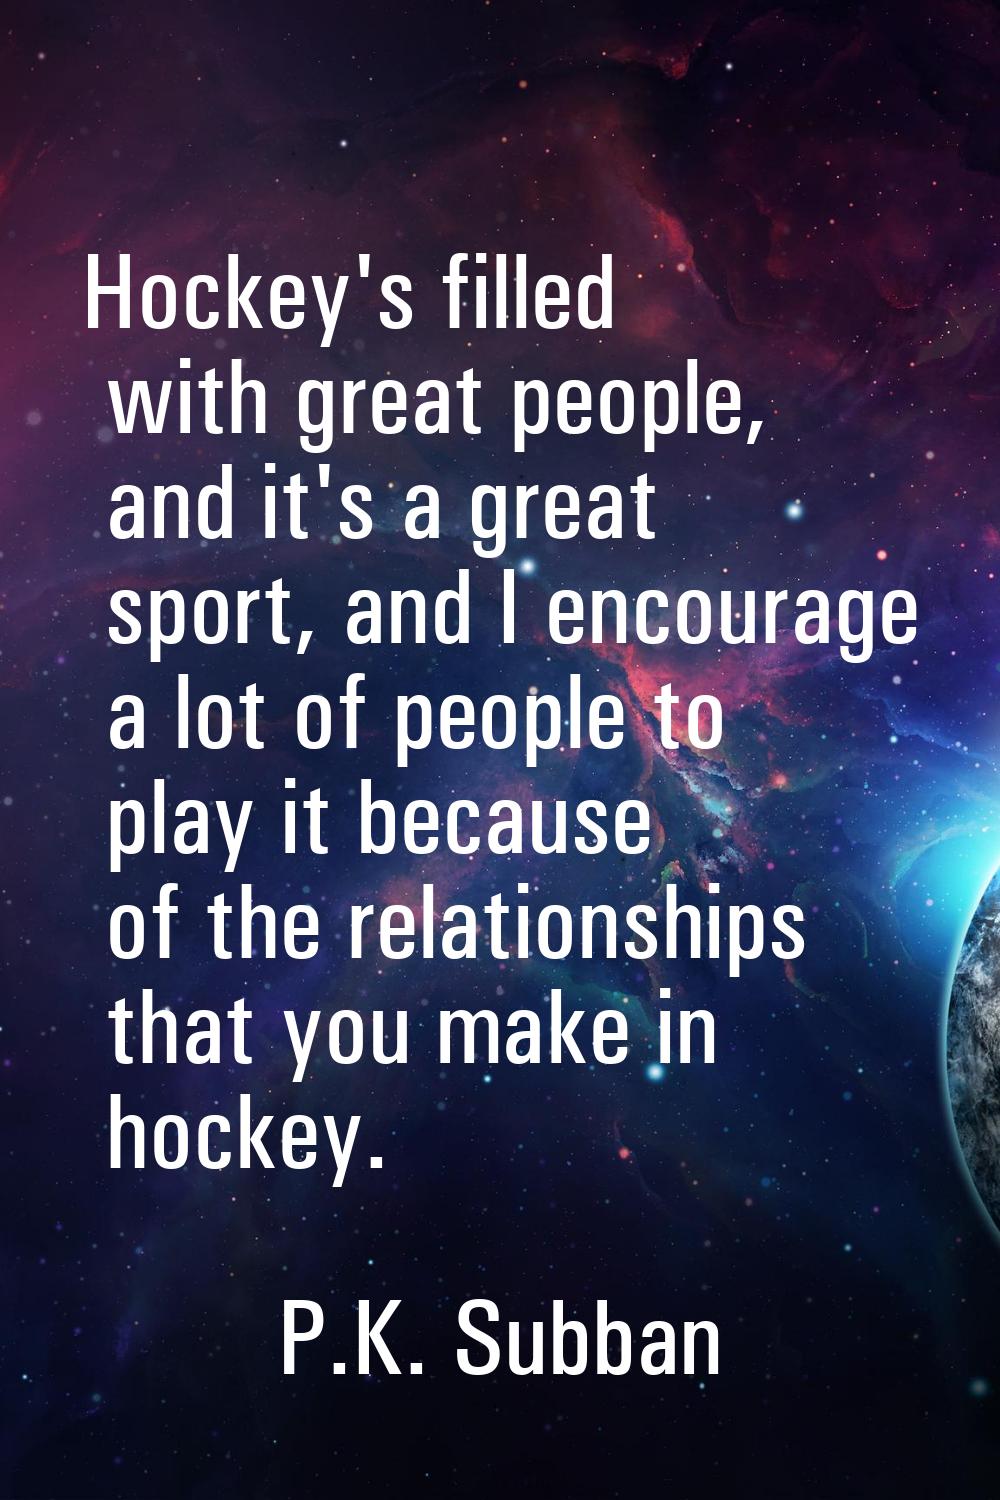 Hockey's filled with great people, and it's a great sport, and I encourage a lot of people to play 